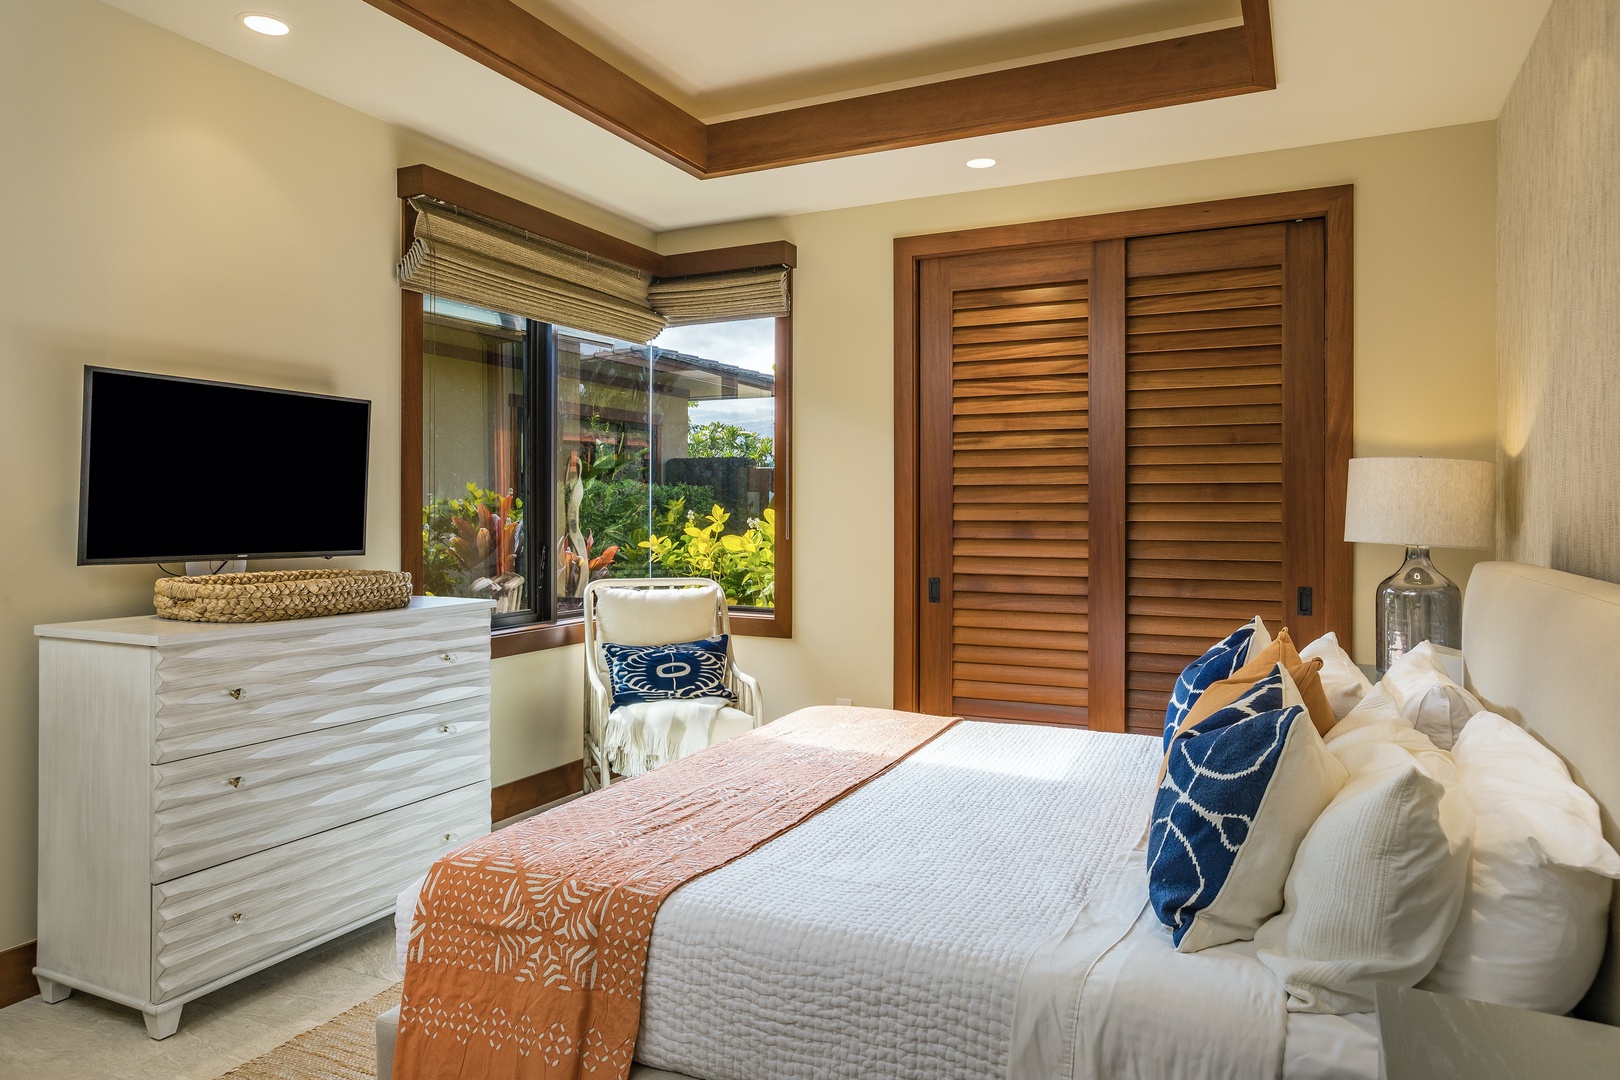 Kailua Kona Vacation Rentals, 4BD Kulanakauhale (3558) Estate Home at Four Seasons Resort at Hualalai - Guest bedroom one, off the great room, has a large cornerless window that frames the beautiful garden courtyard.